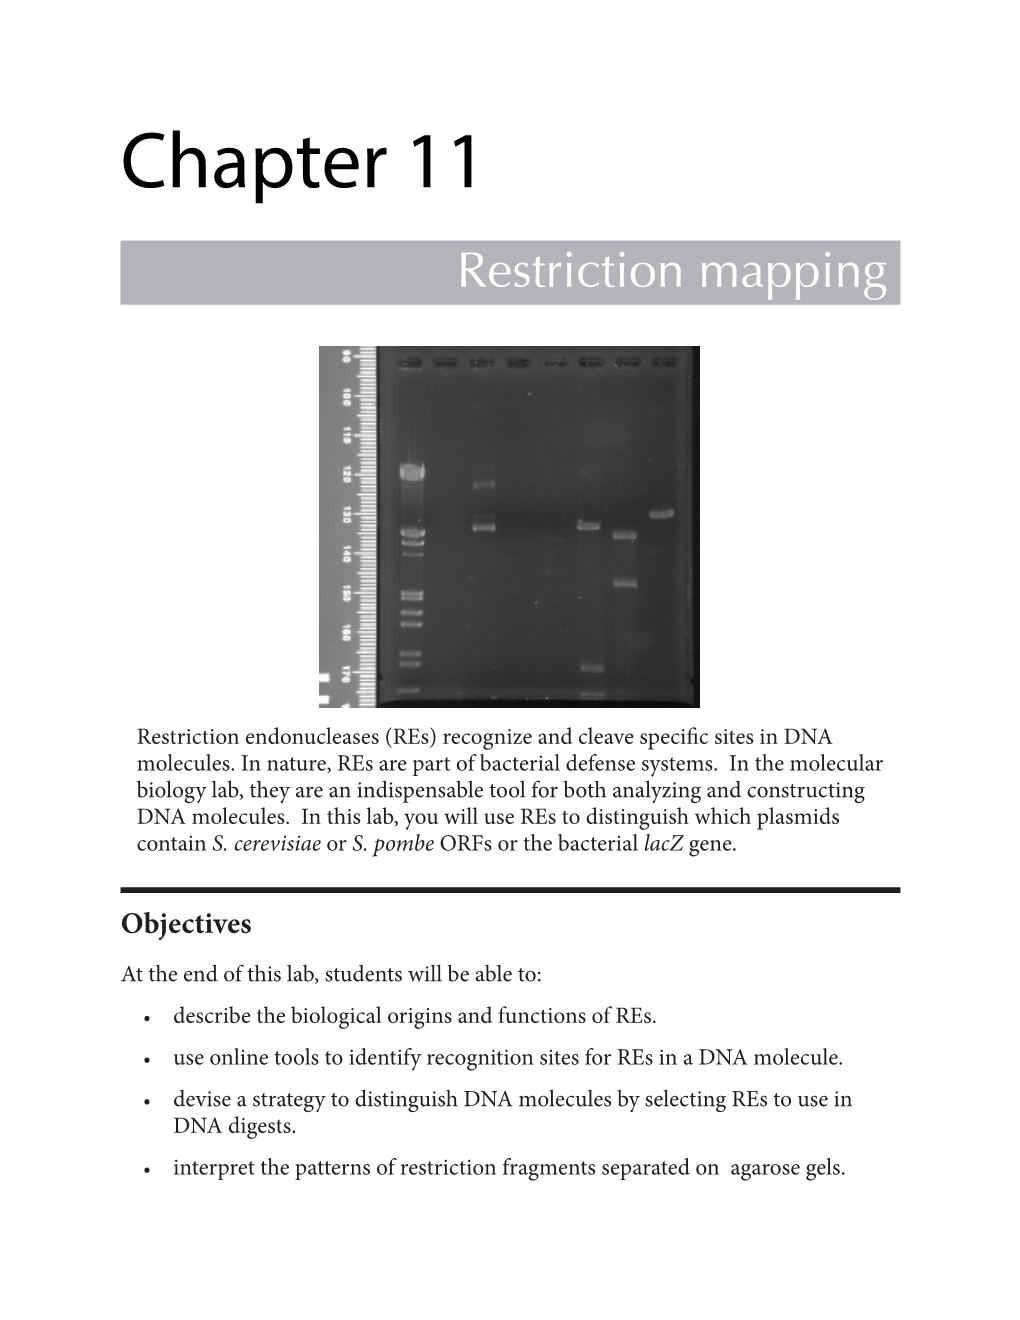 Chapter 11 Restriction Mapping